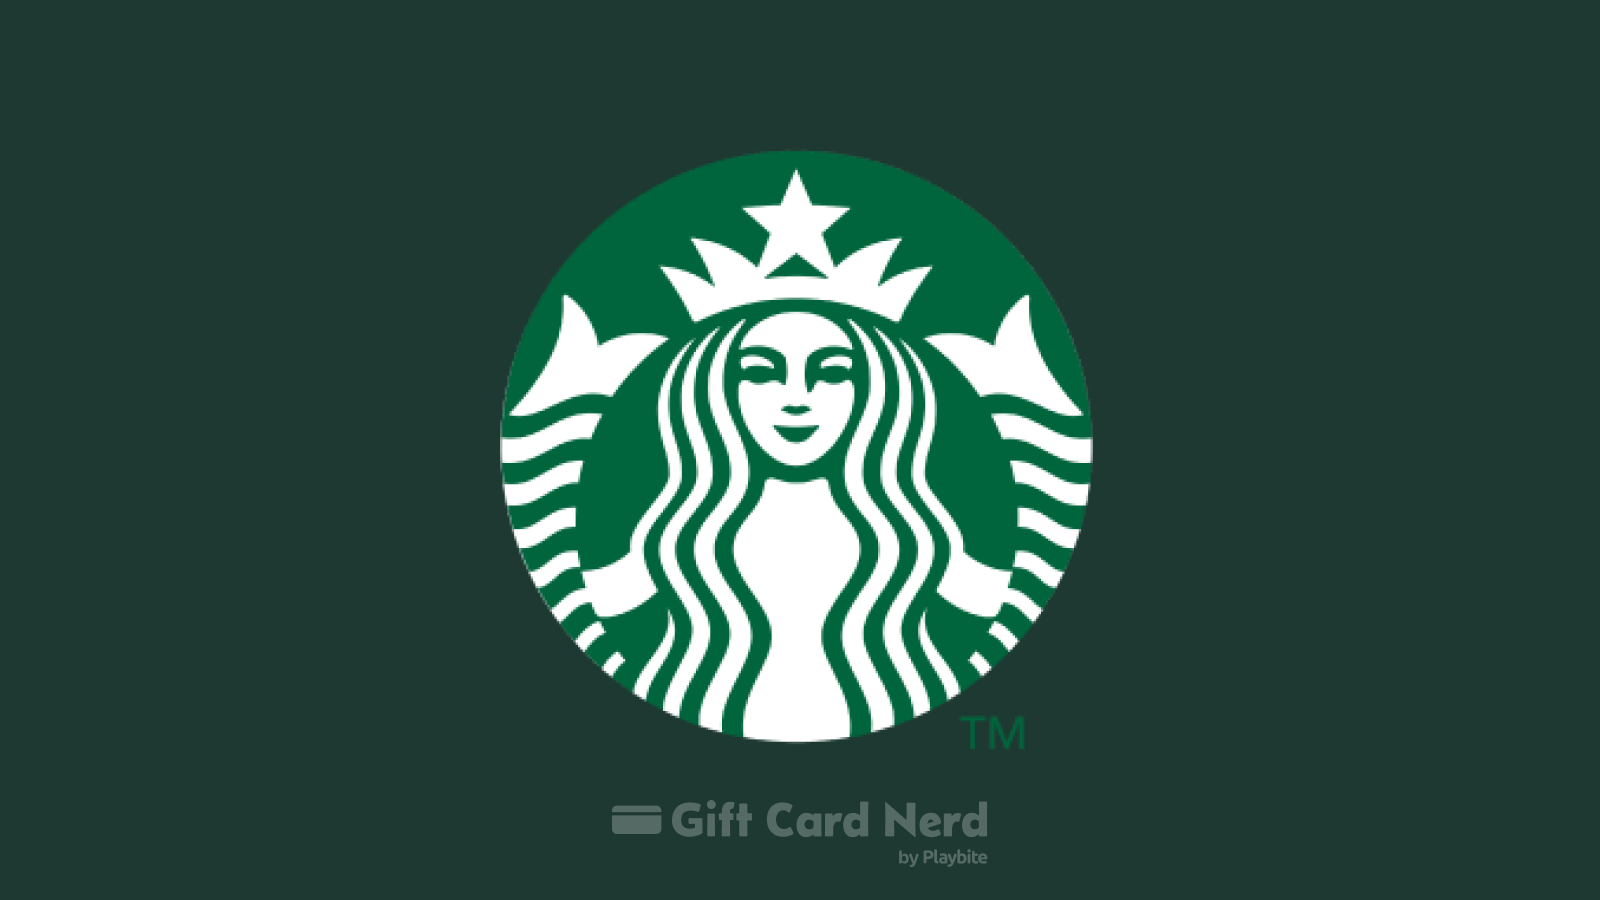 Can I Use a Starbucks Gift Card on Roblox?